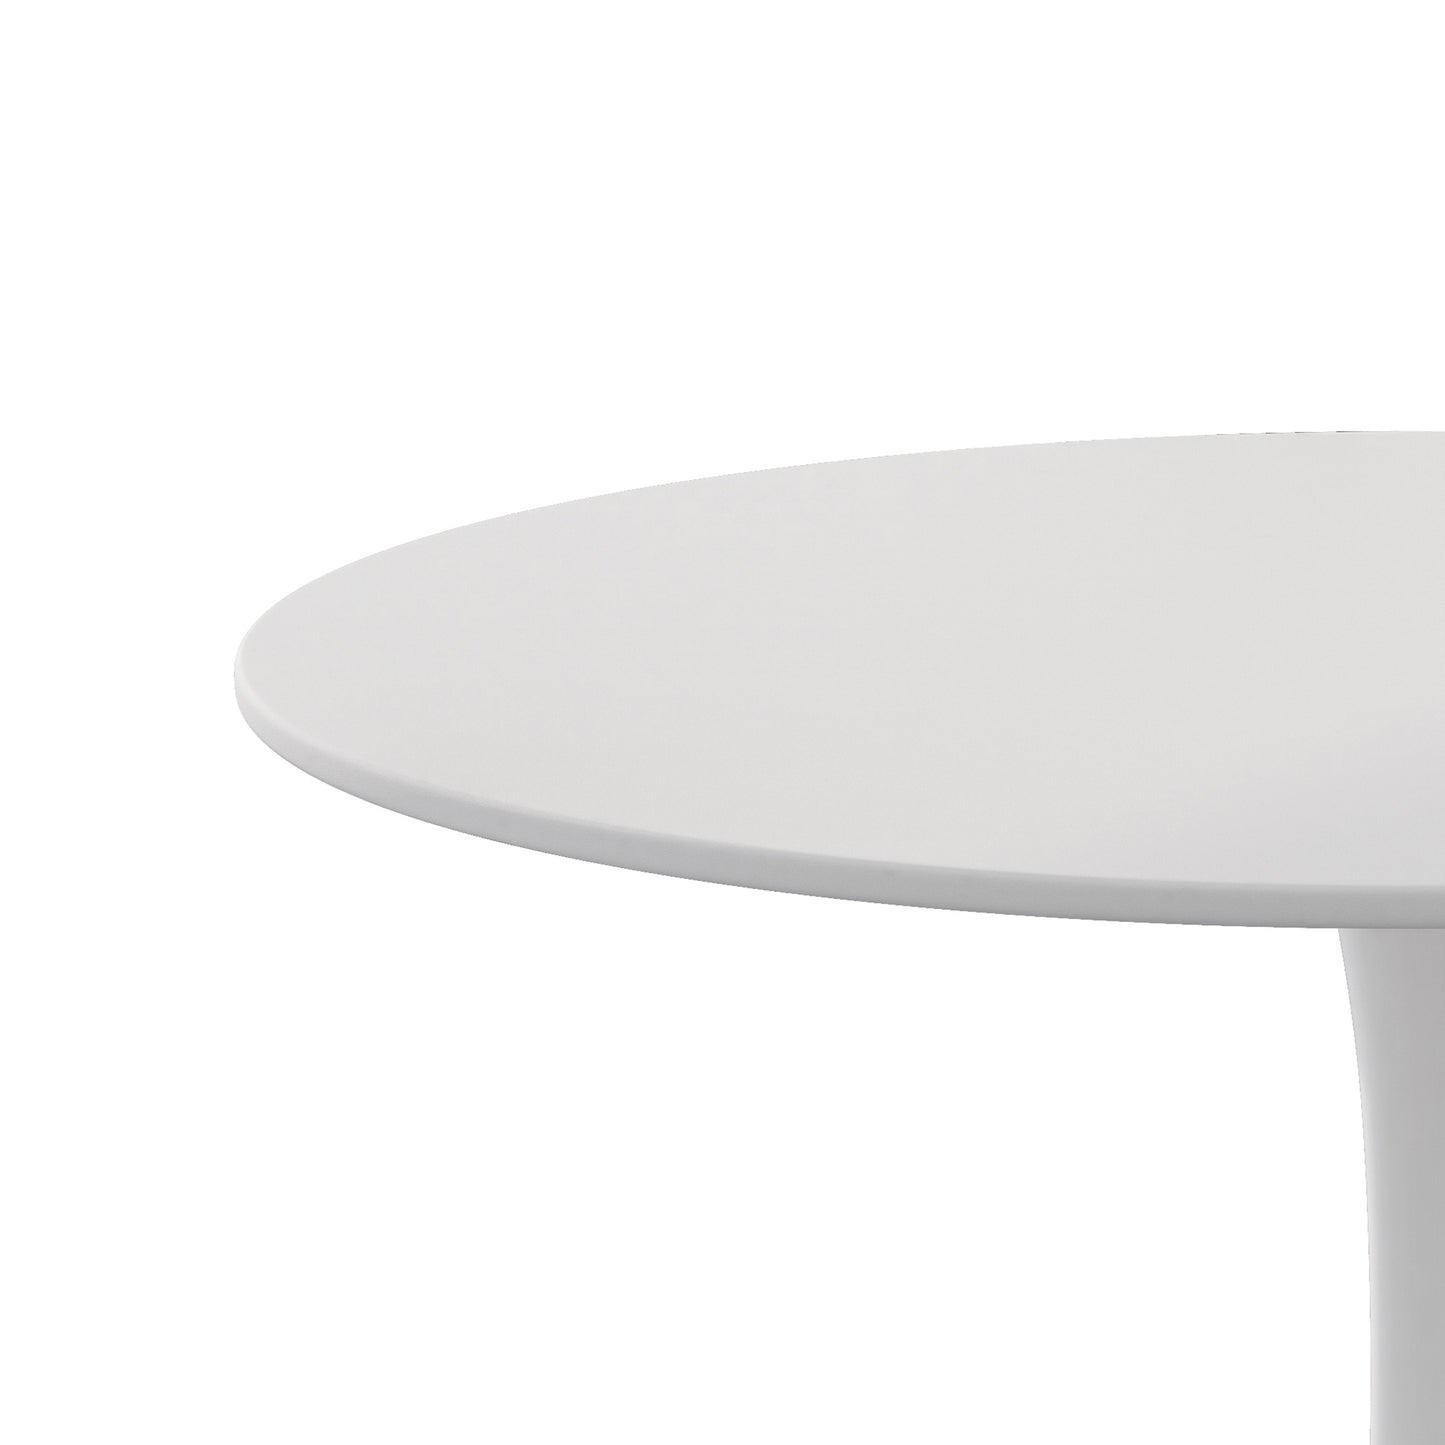 42" Modern Round Dining Table with Round MDF Table Top